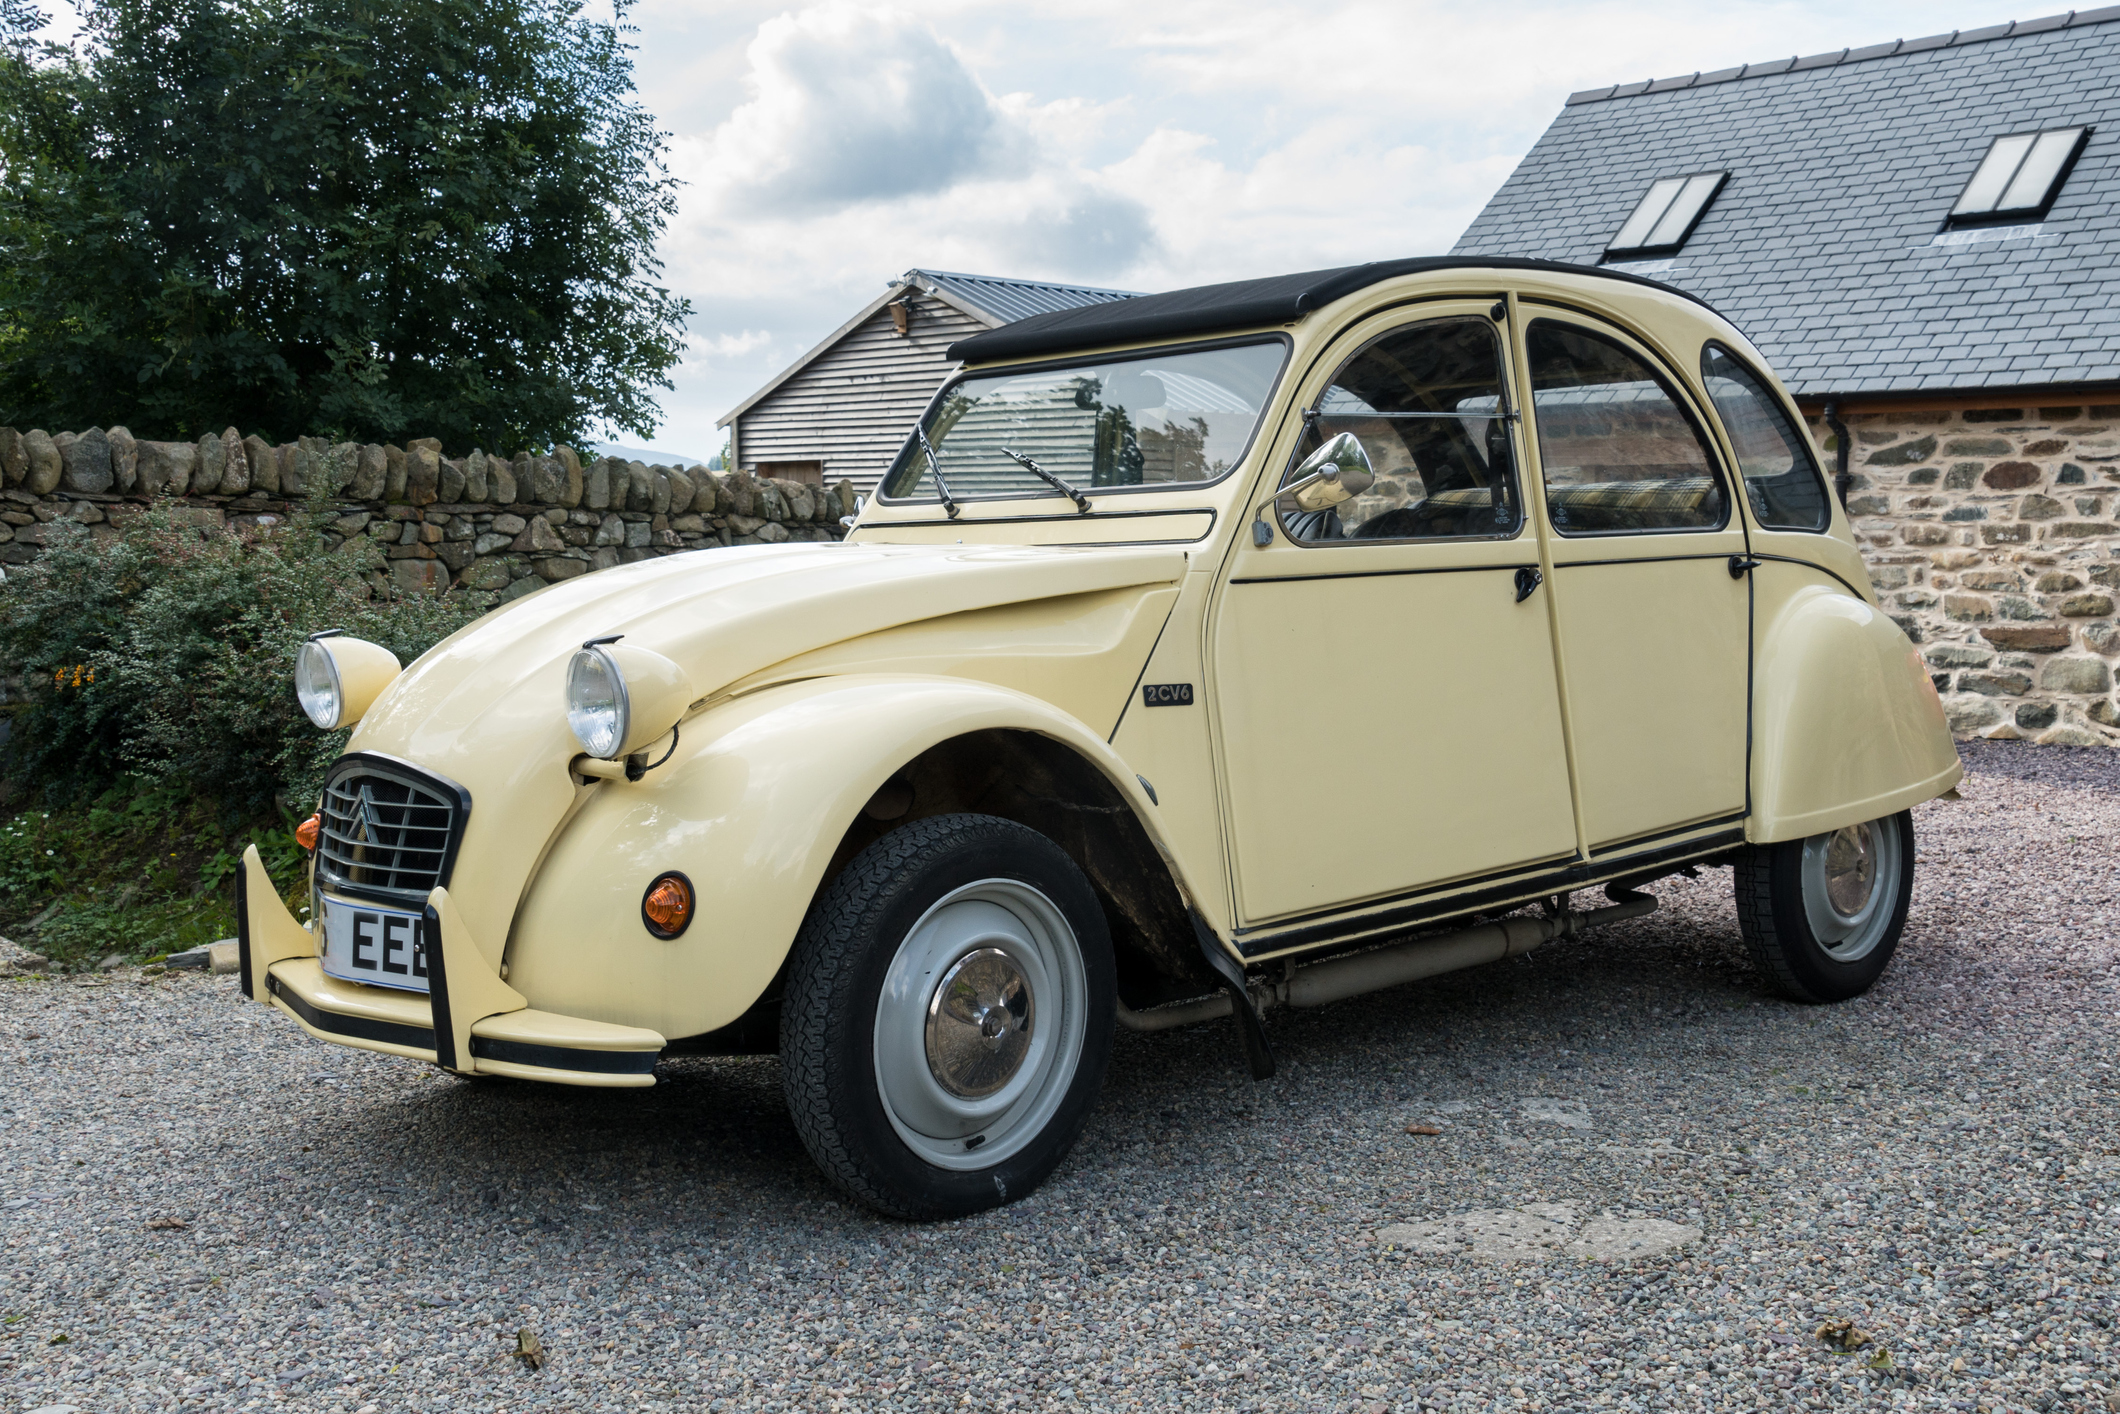 “In Africa they call [The 2CV] the ‘Steel Camel' because it goes everywhere"